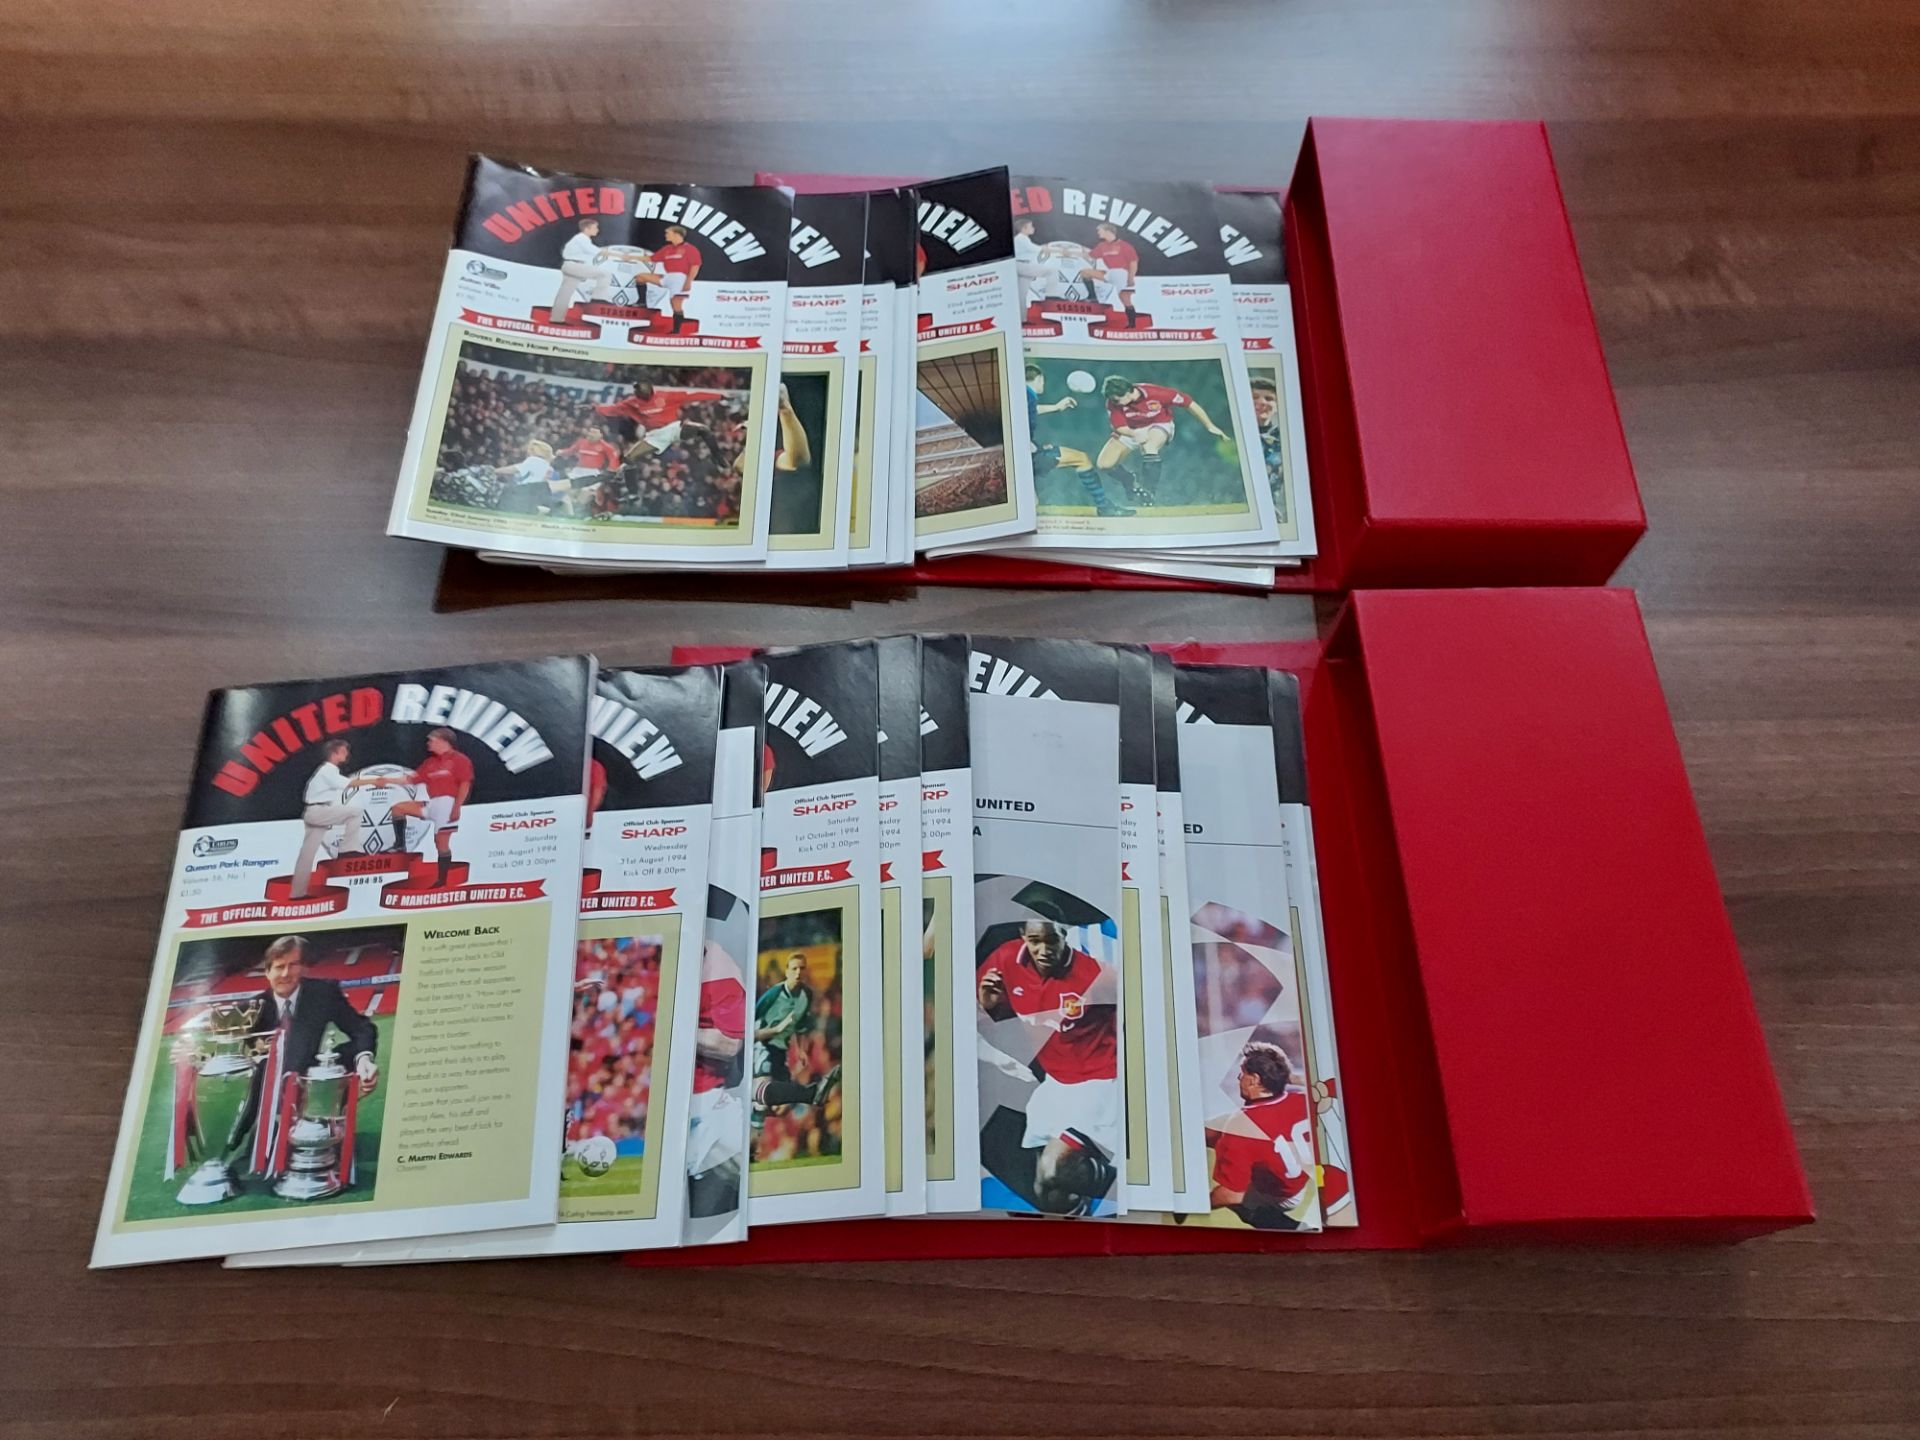 28 X MANCHESTER UNITED HOME GAME PROGRAMS AND 3 X CHAMPIONS LEAGUE PROGRAMS 1994/95 - Image 2 of 2